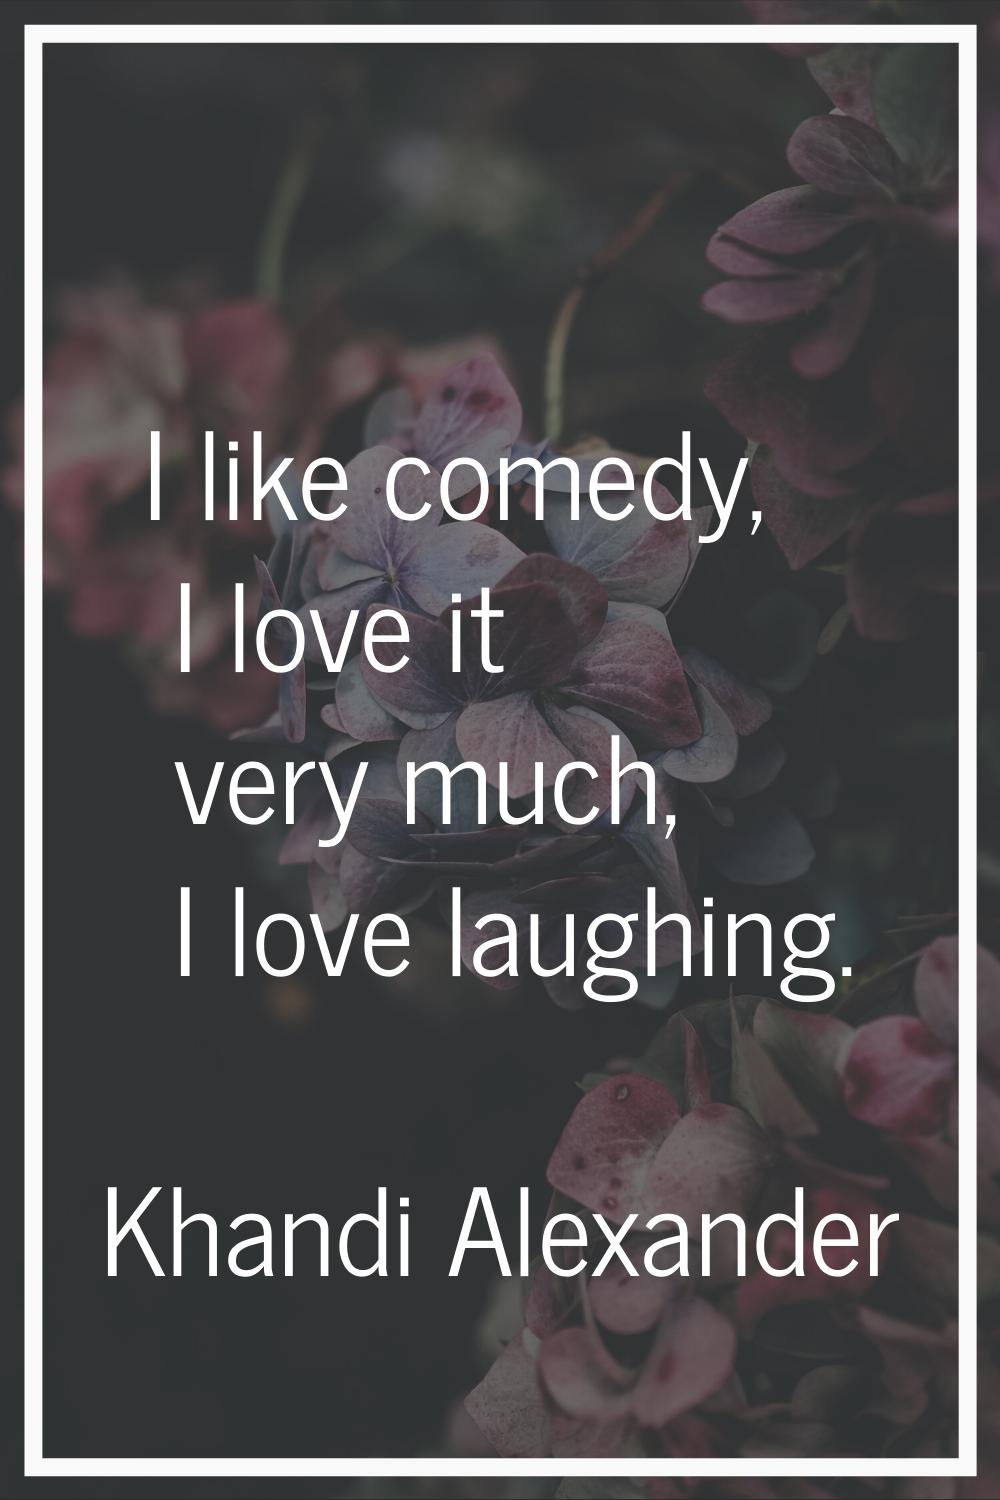 I like comedy, I love it very much, I love laughing.